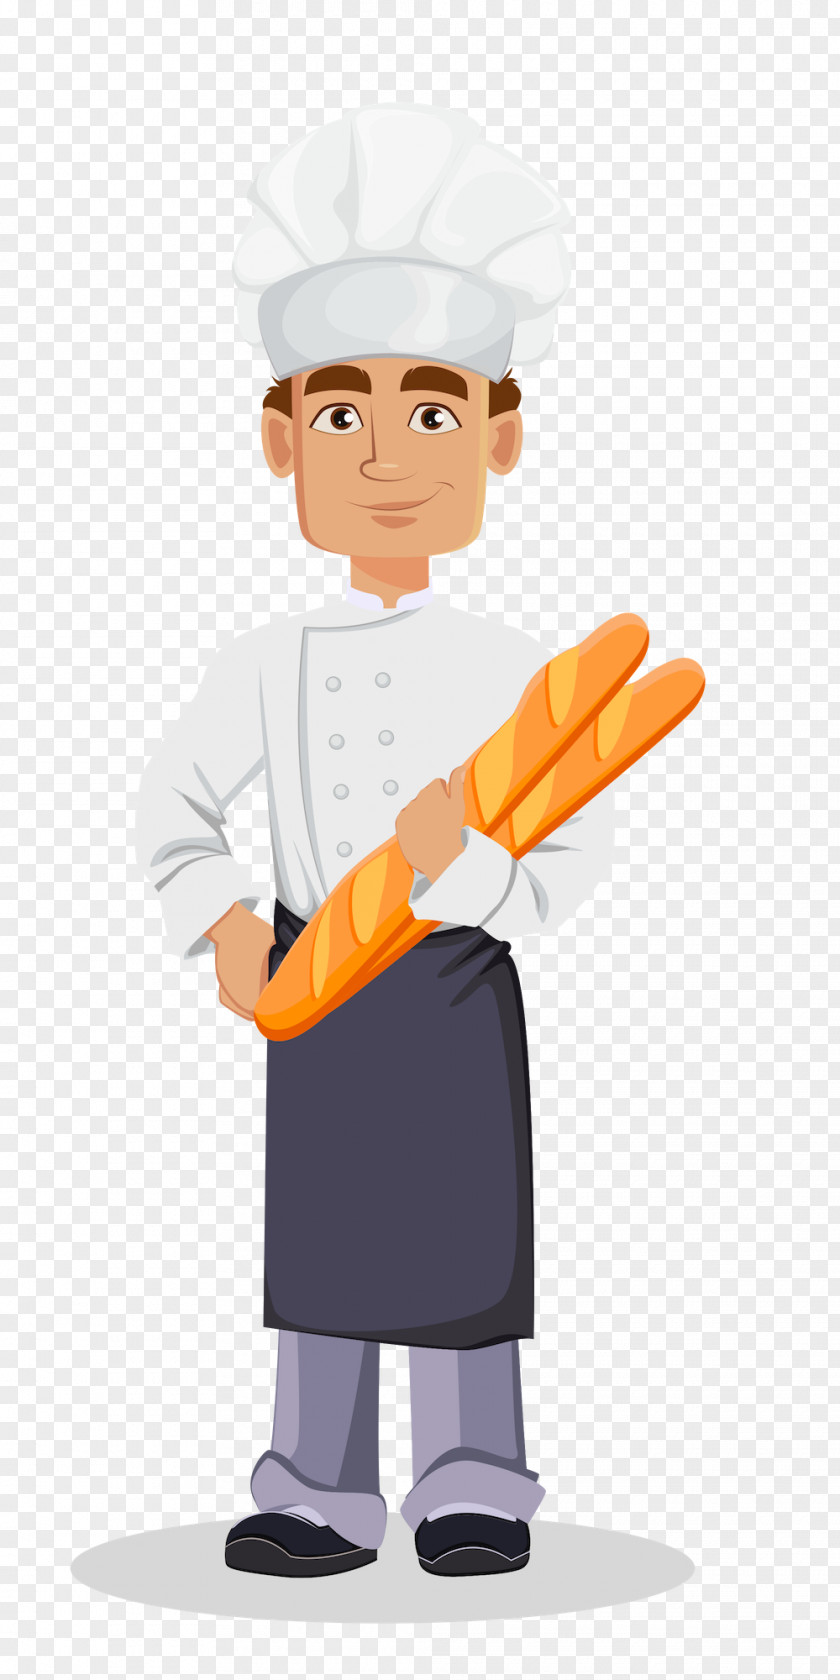 Finger Chief Cook Chef Hat PNG